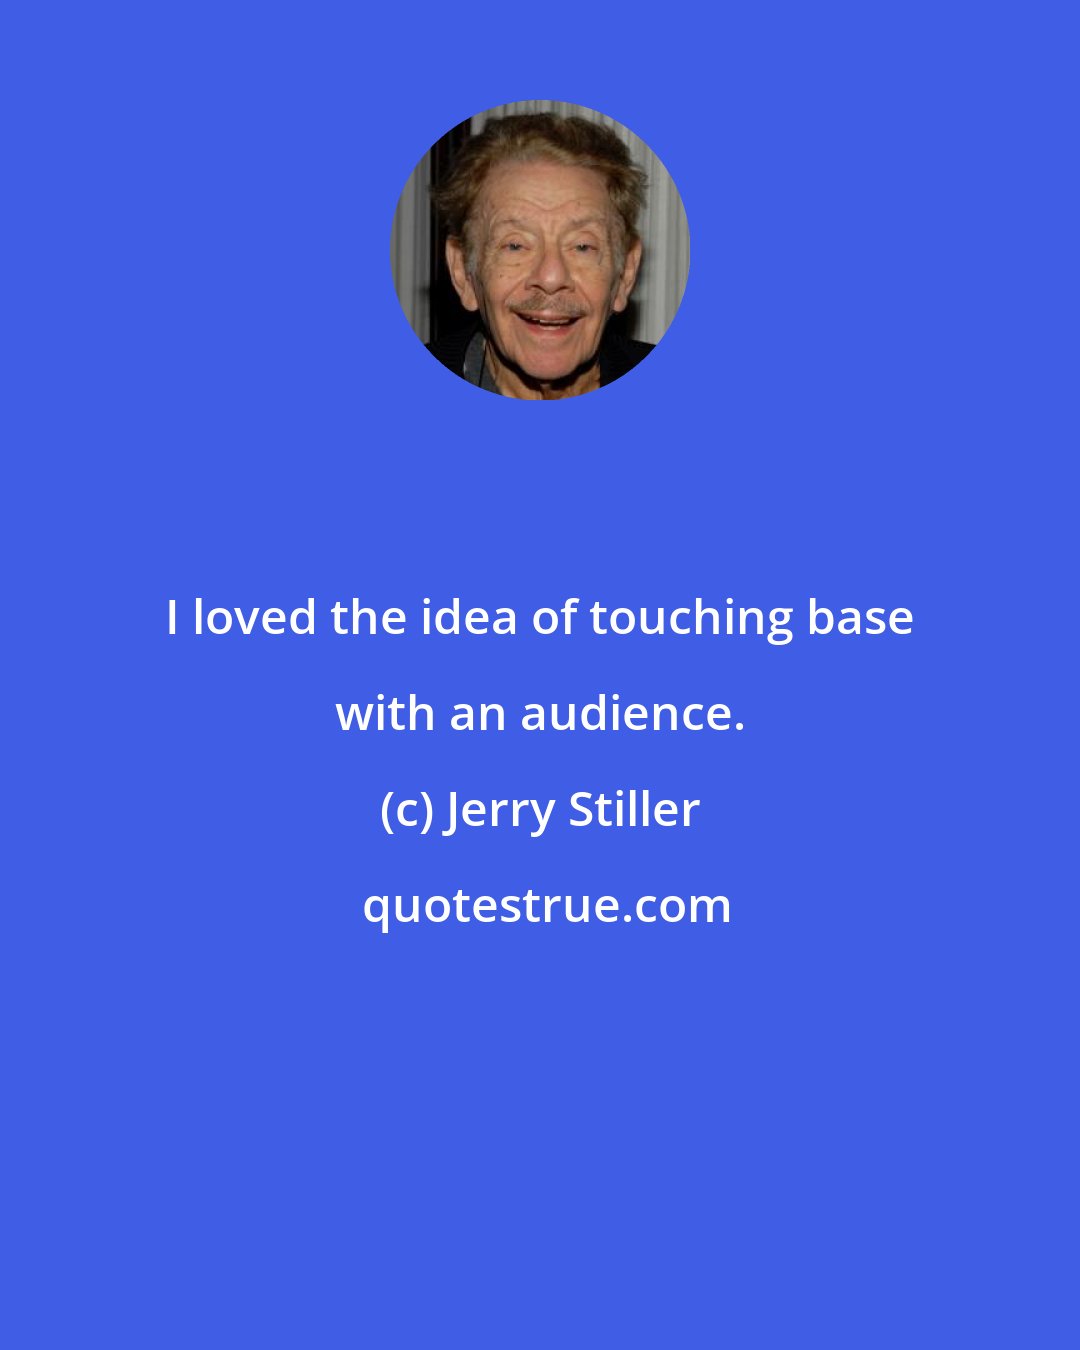 Jerry Stiller: I loved the idea of touching base with an audience.